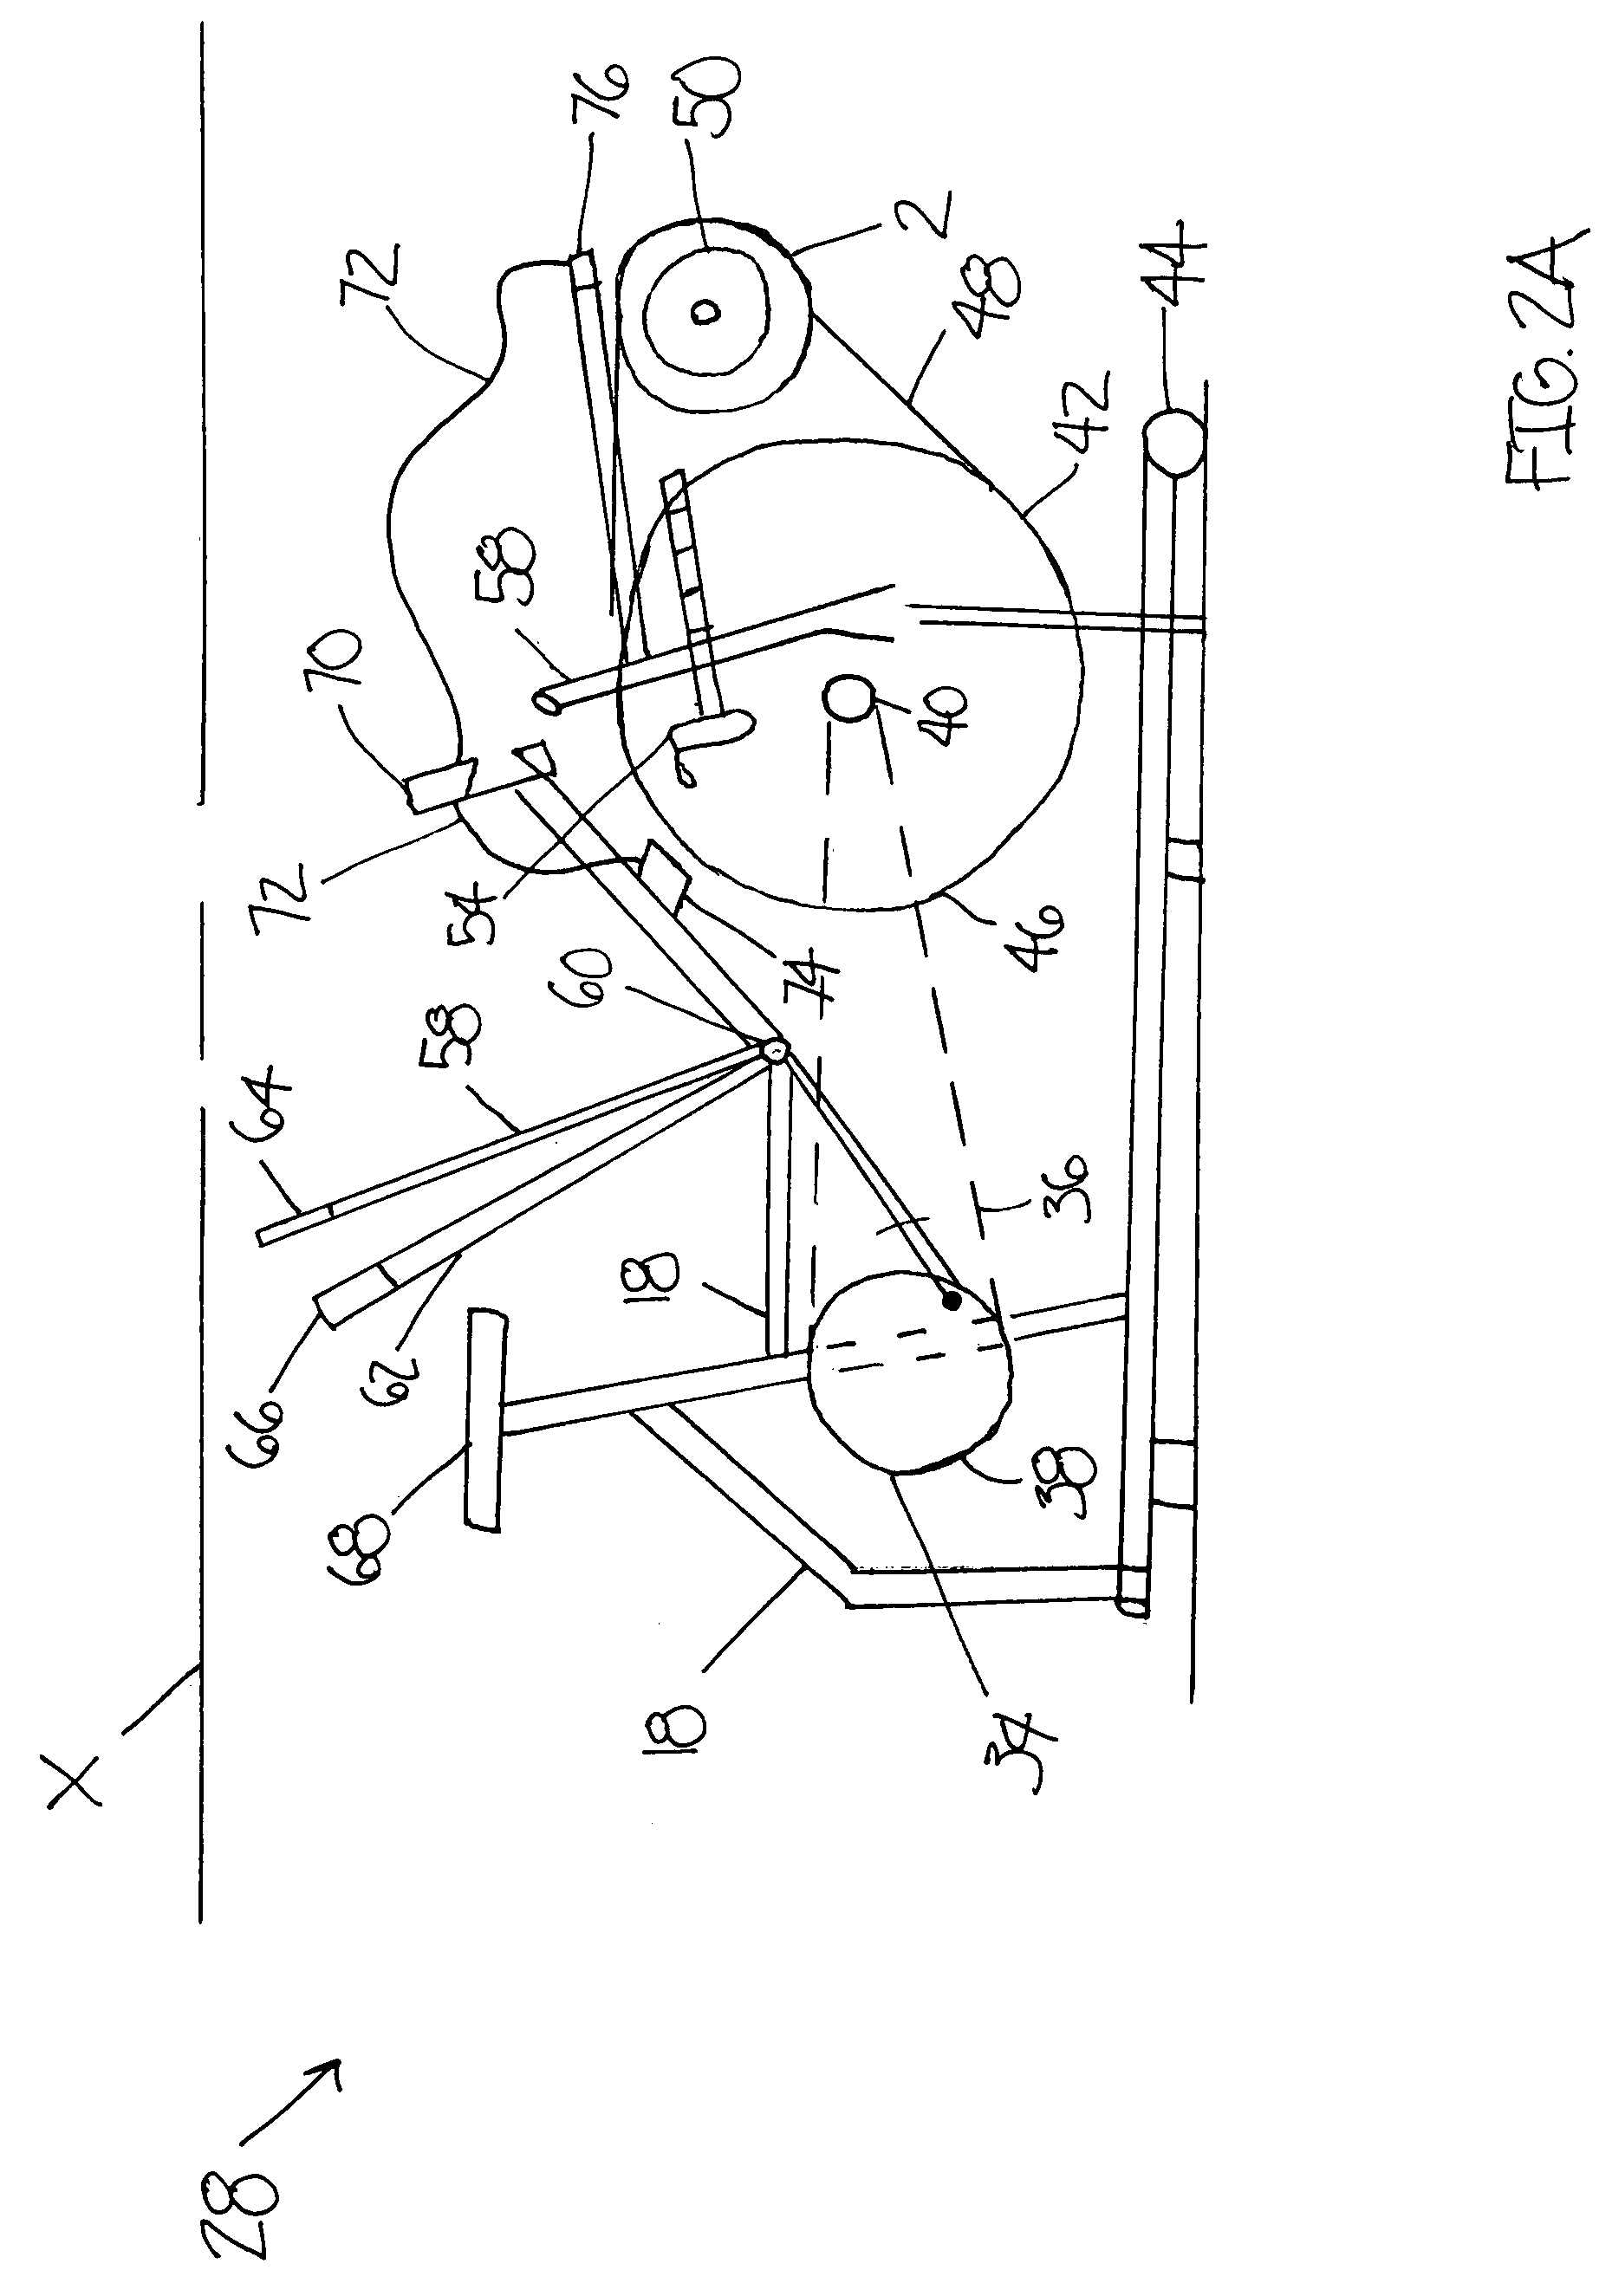 Resistance and power monitoring device and system for exercise equipment